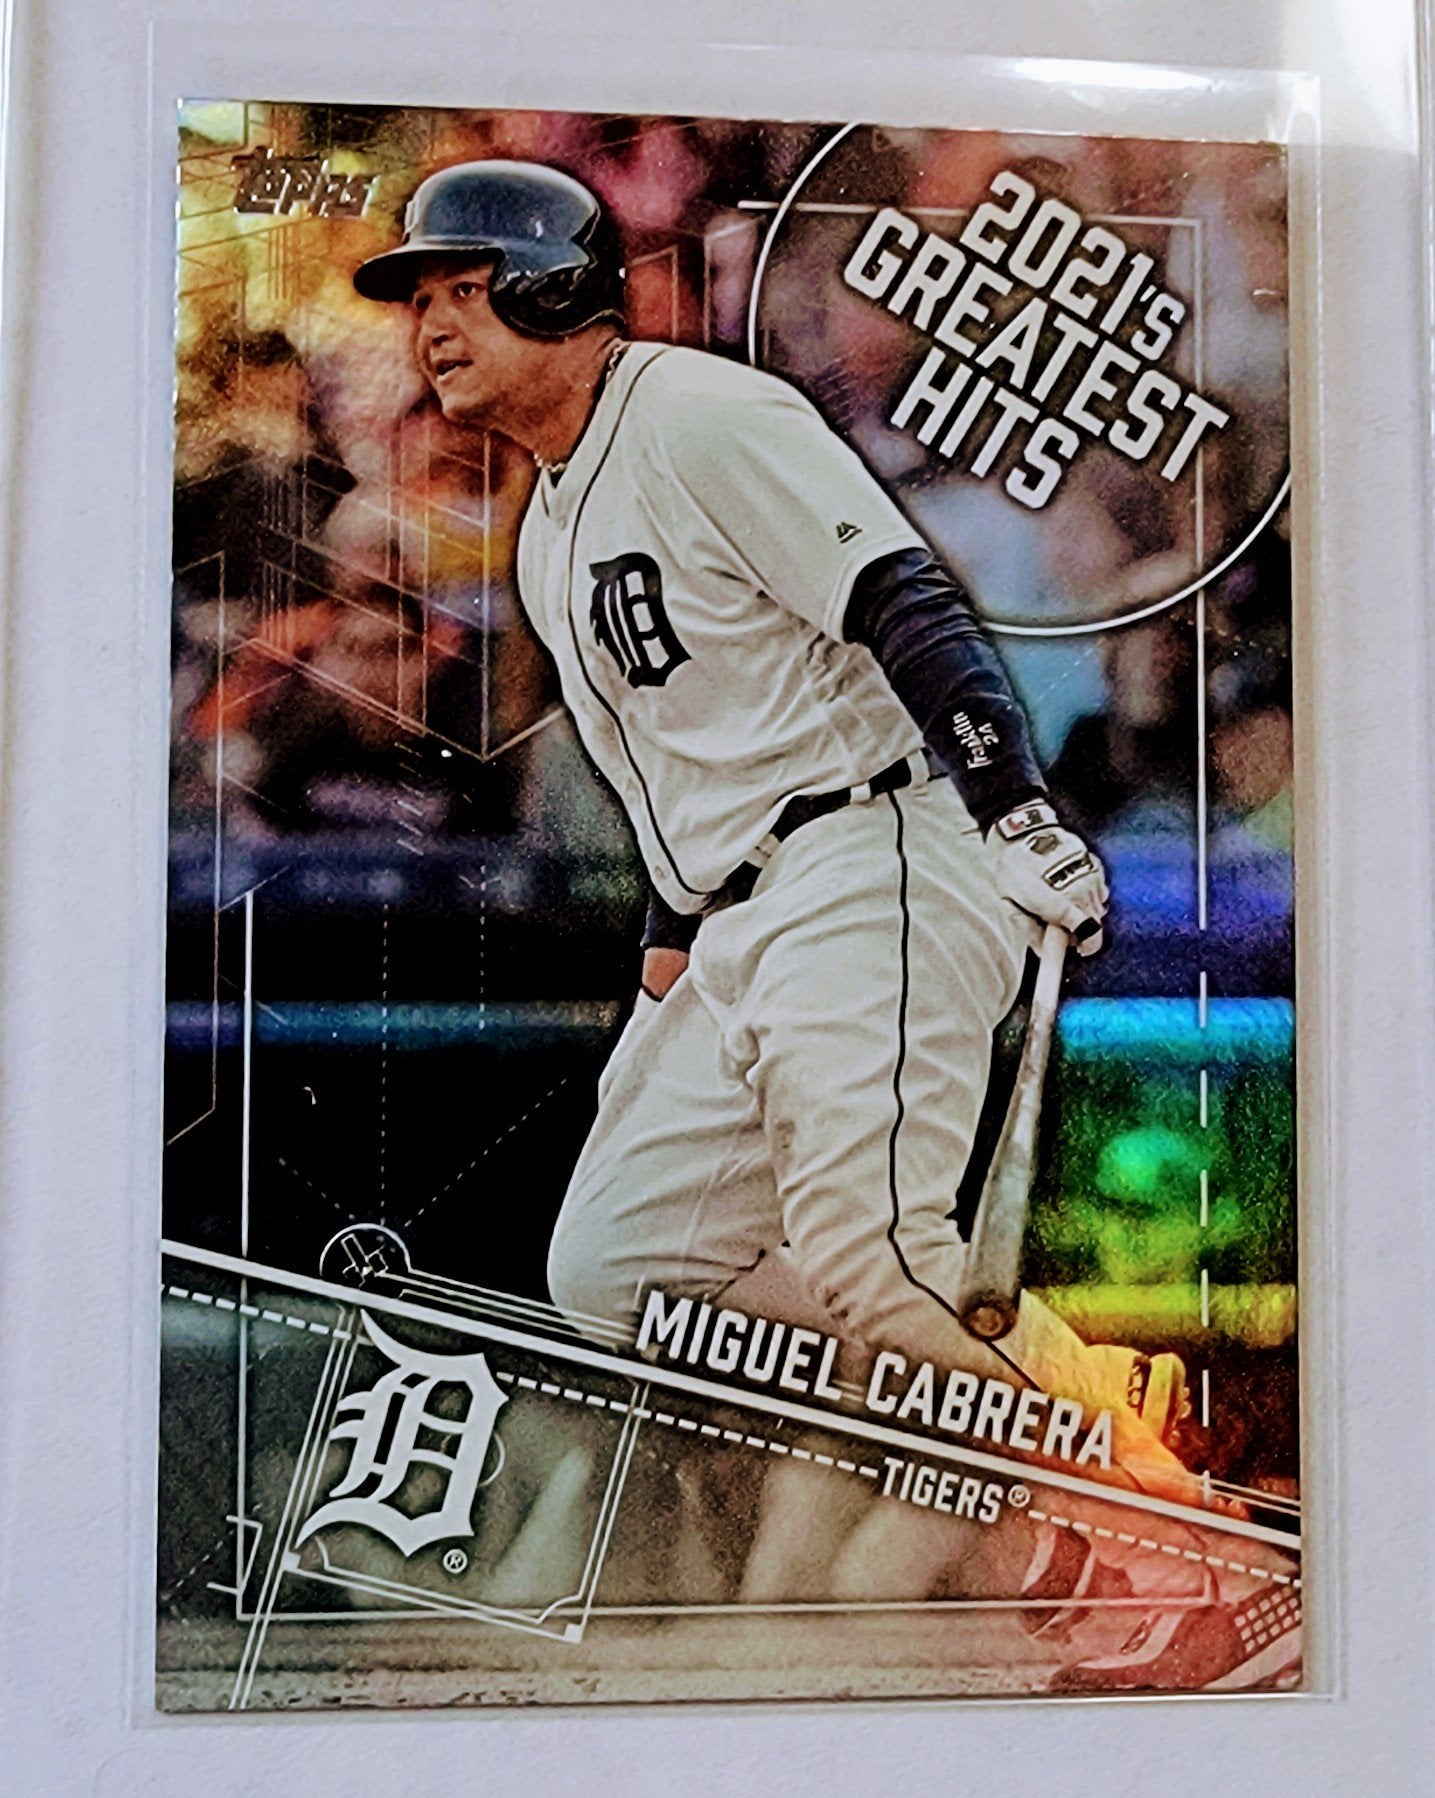 2022 Topps Update All Star Game Card of Miguel Cabrera - Tigers